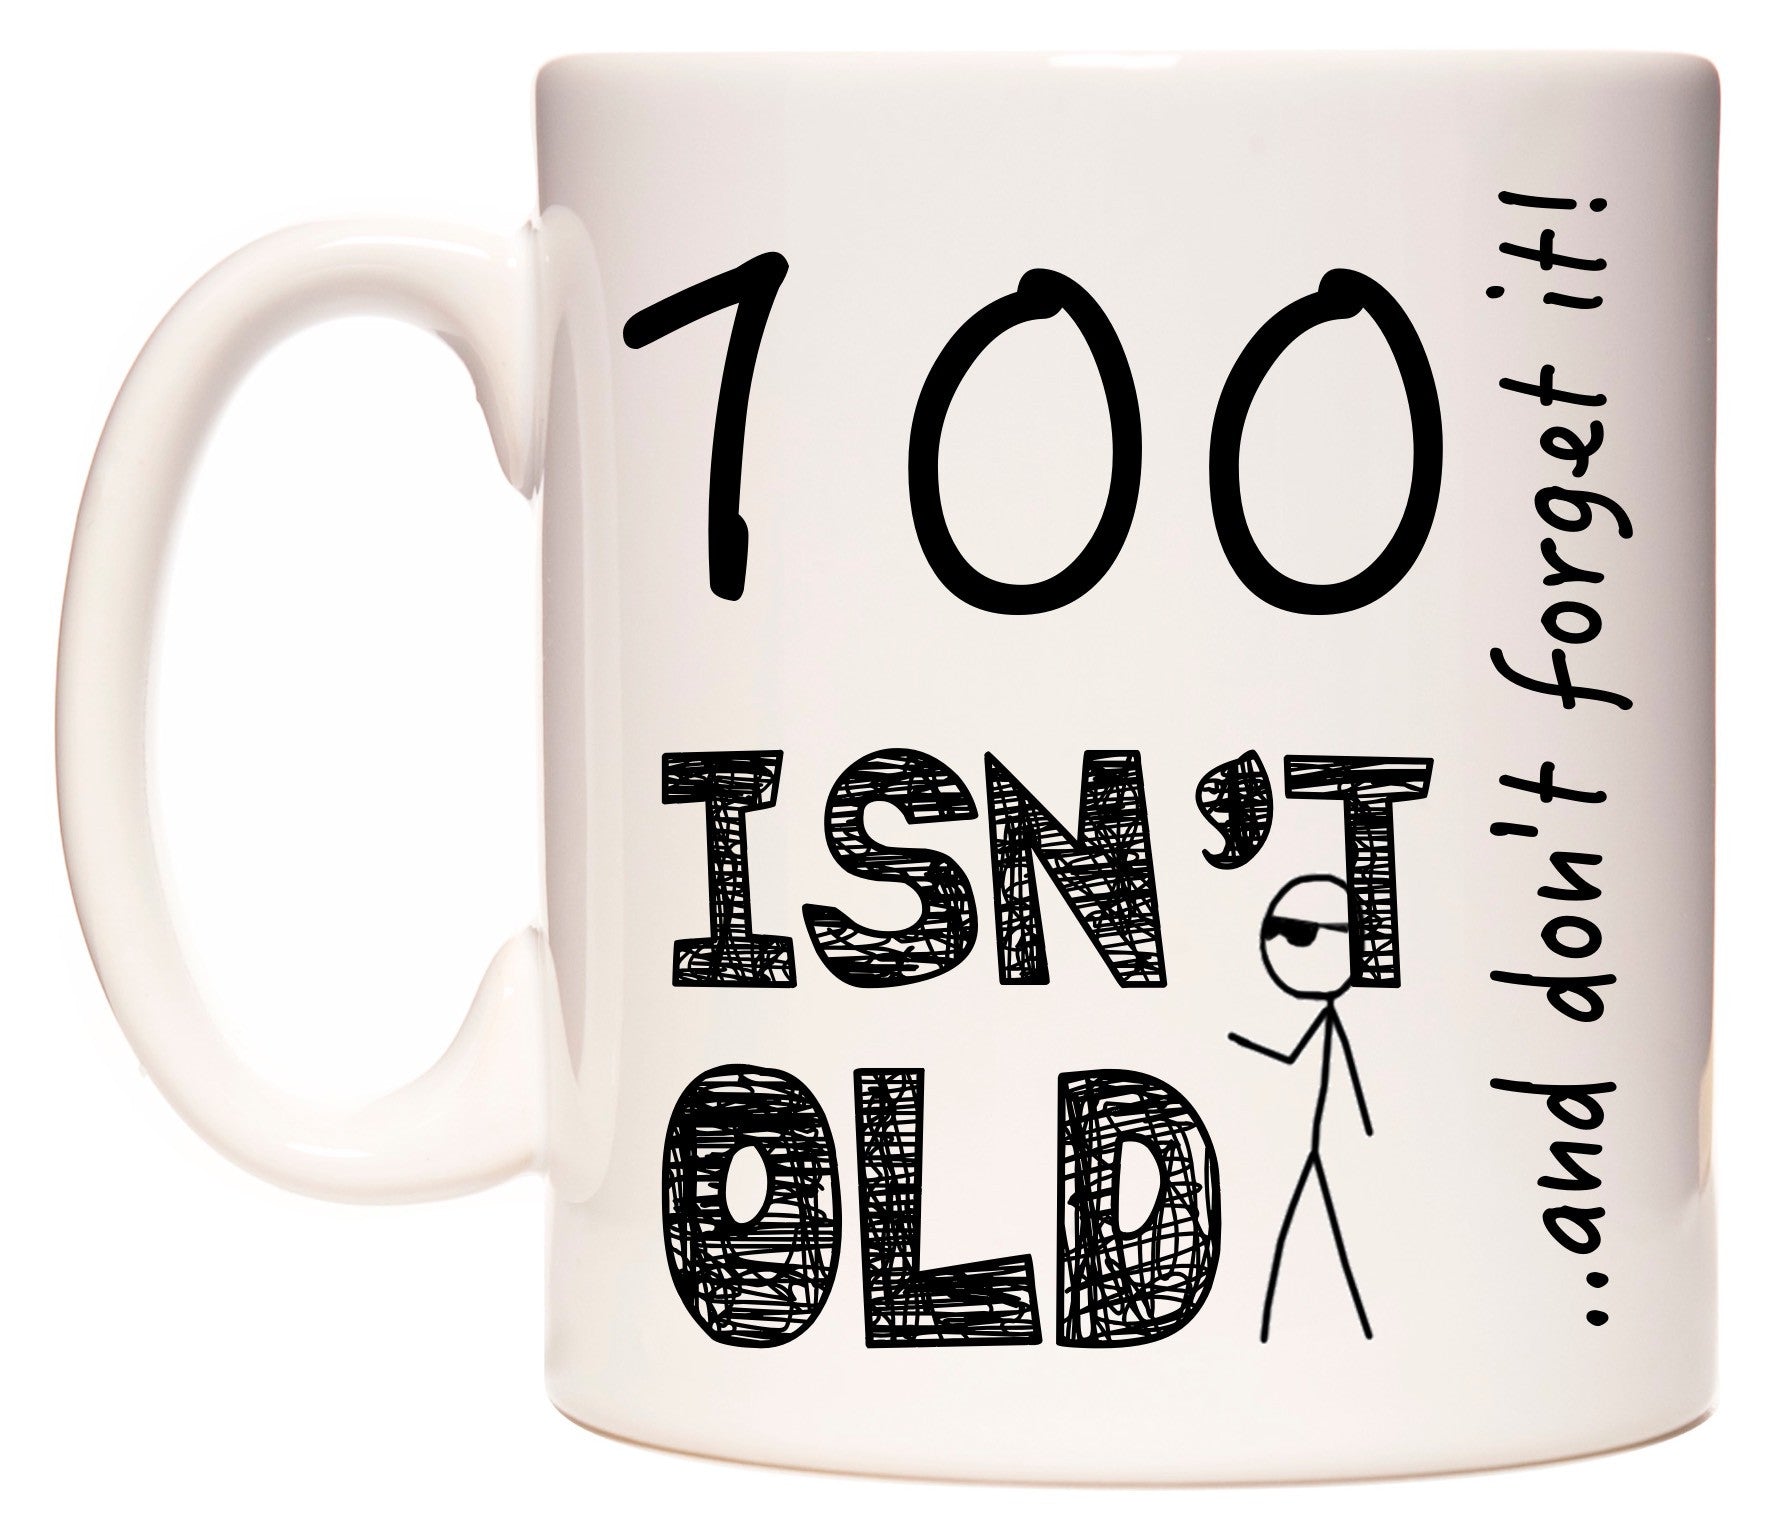 This mug features 100 Isn't Old